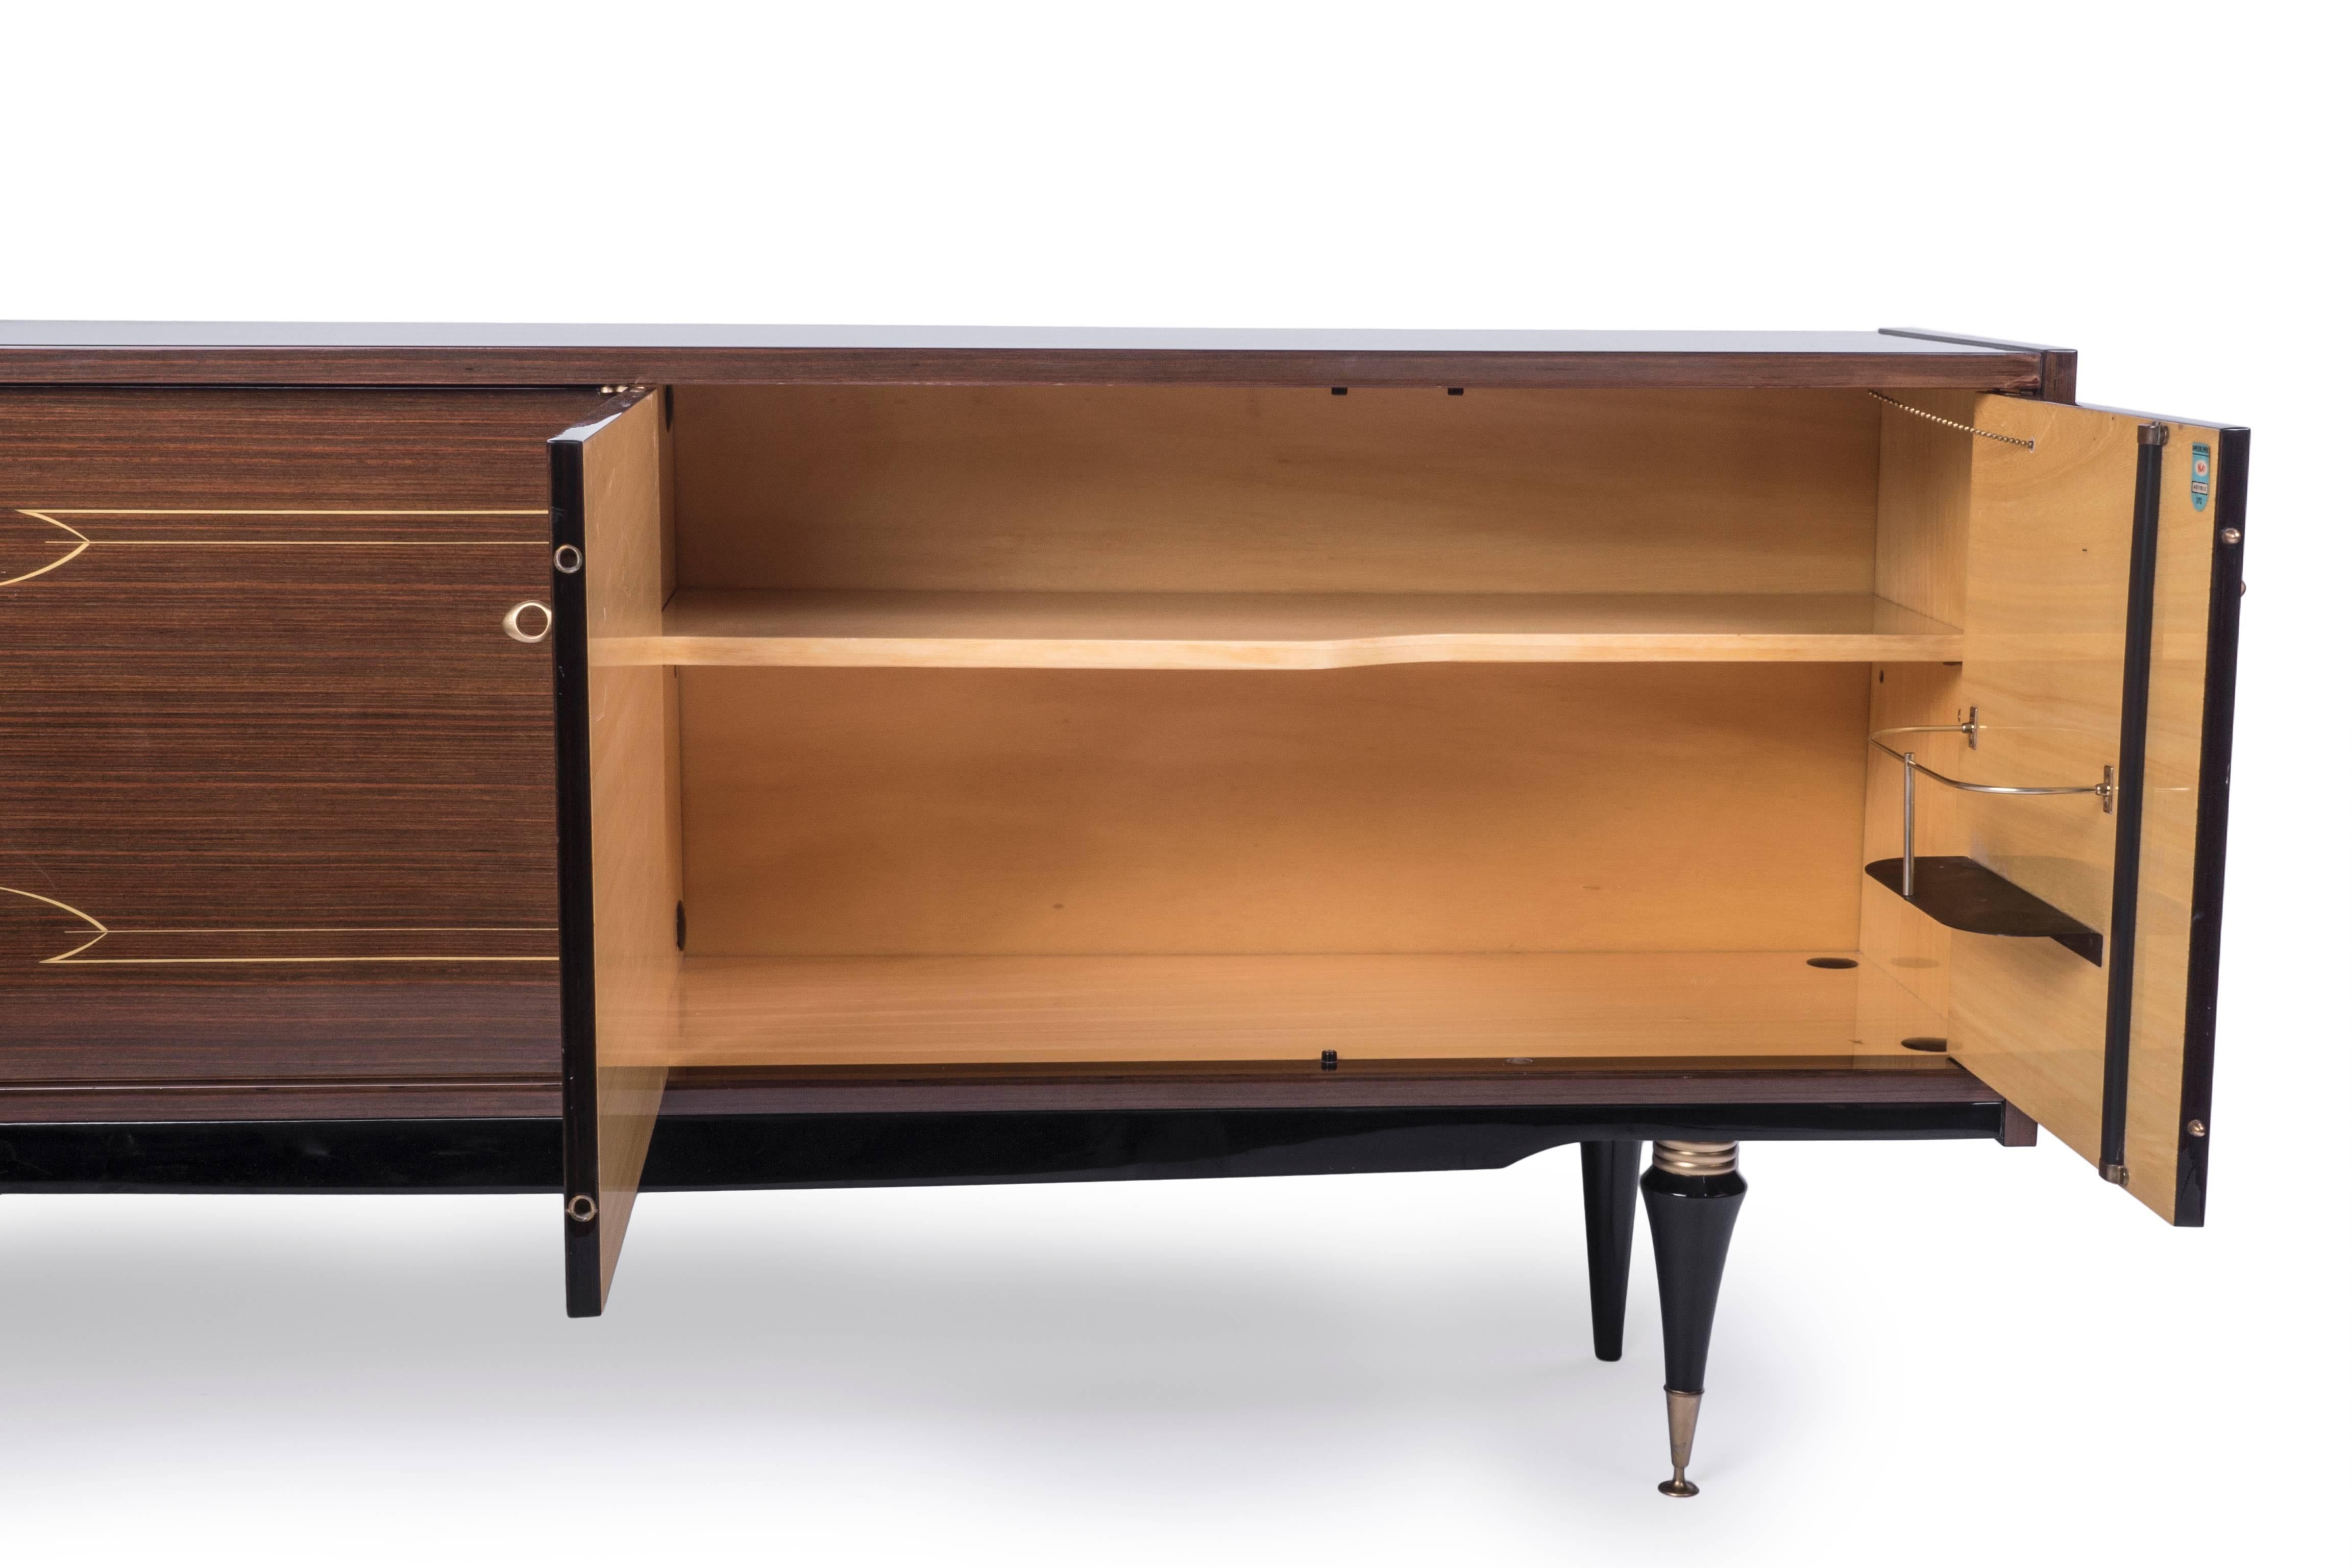 Luxe French Art Deco Macassar ebony buffet with mother of pearl and ivory inlay decorations.

Made in France, circa 1935.